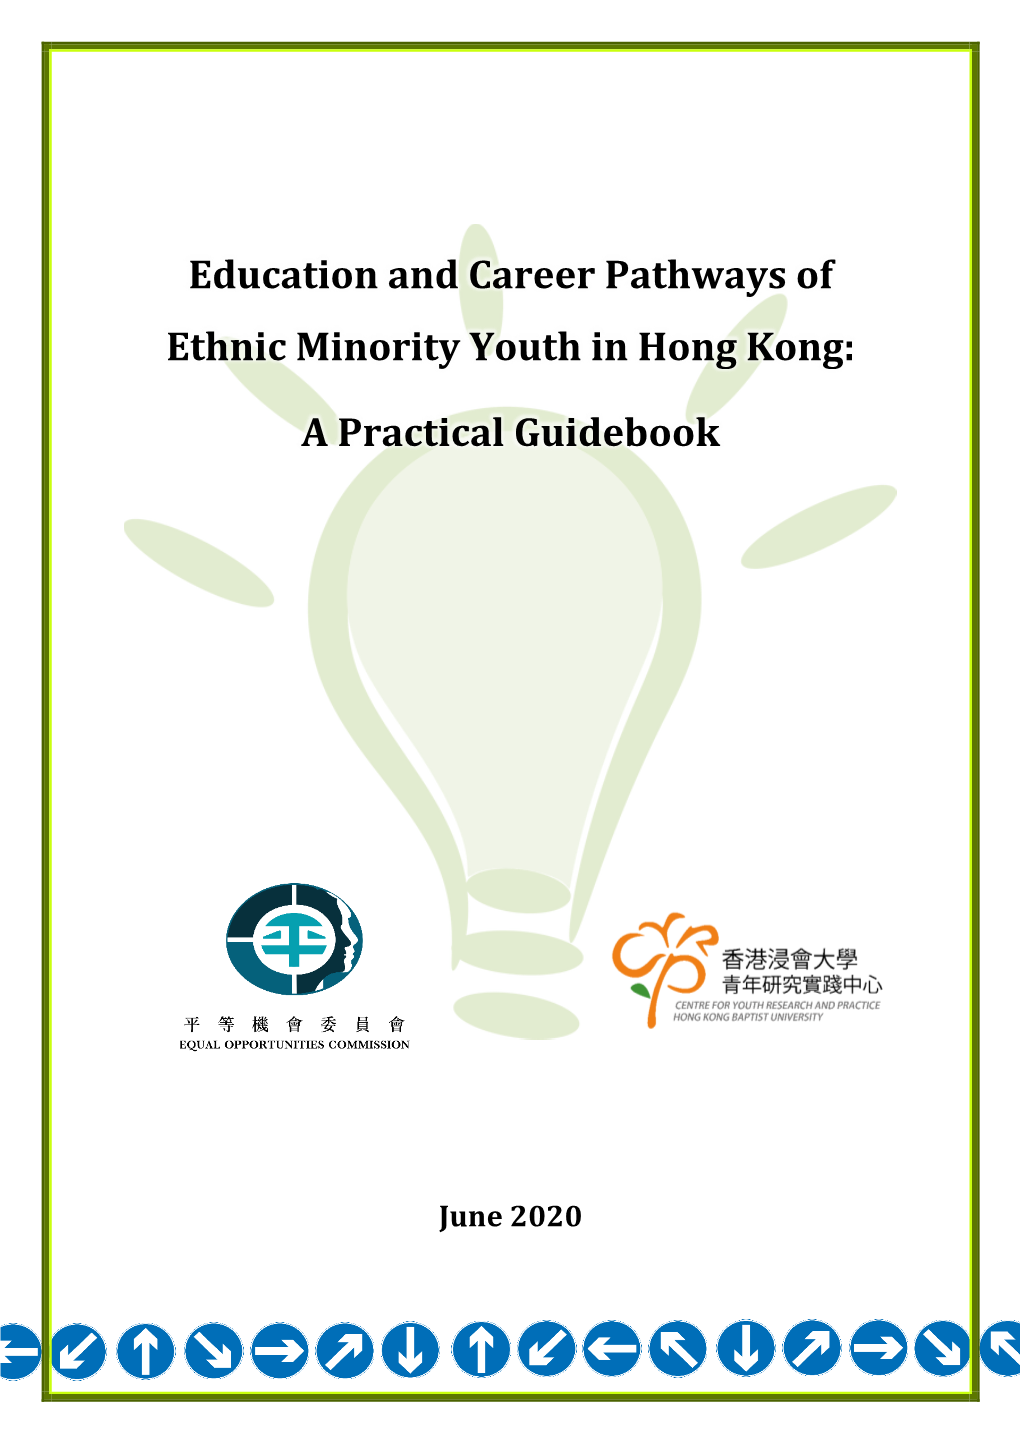 Education and Career Pathways of Ethnic Minority Youth in Hong Kong